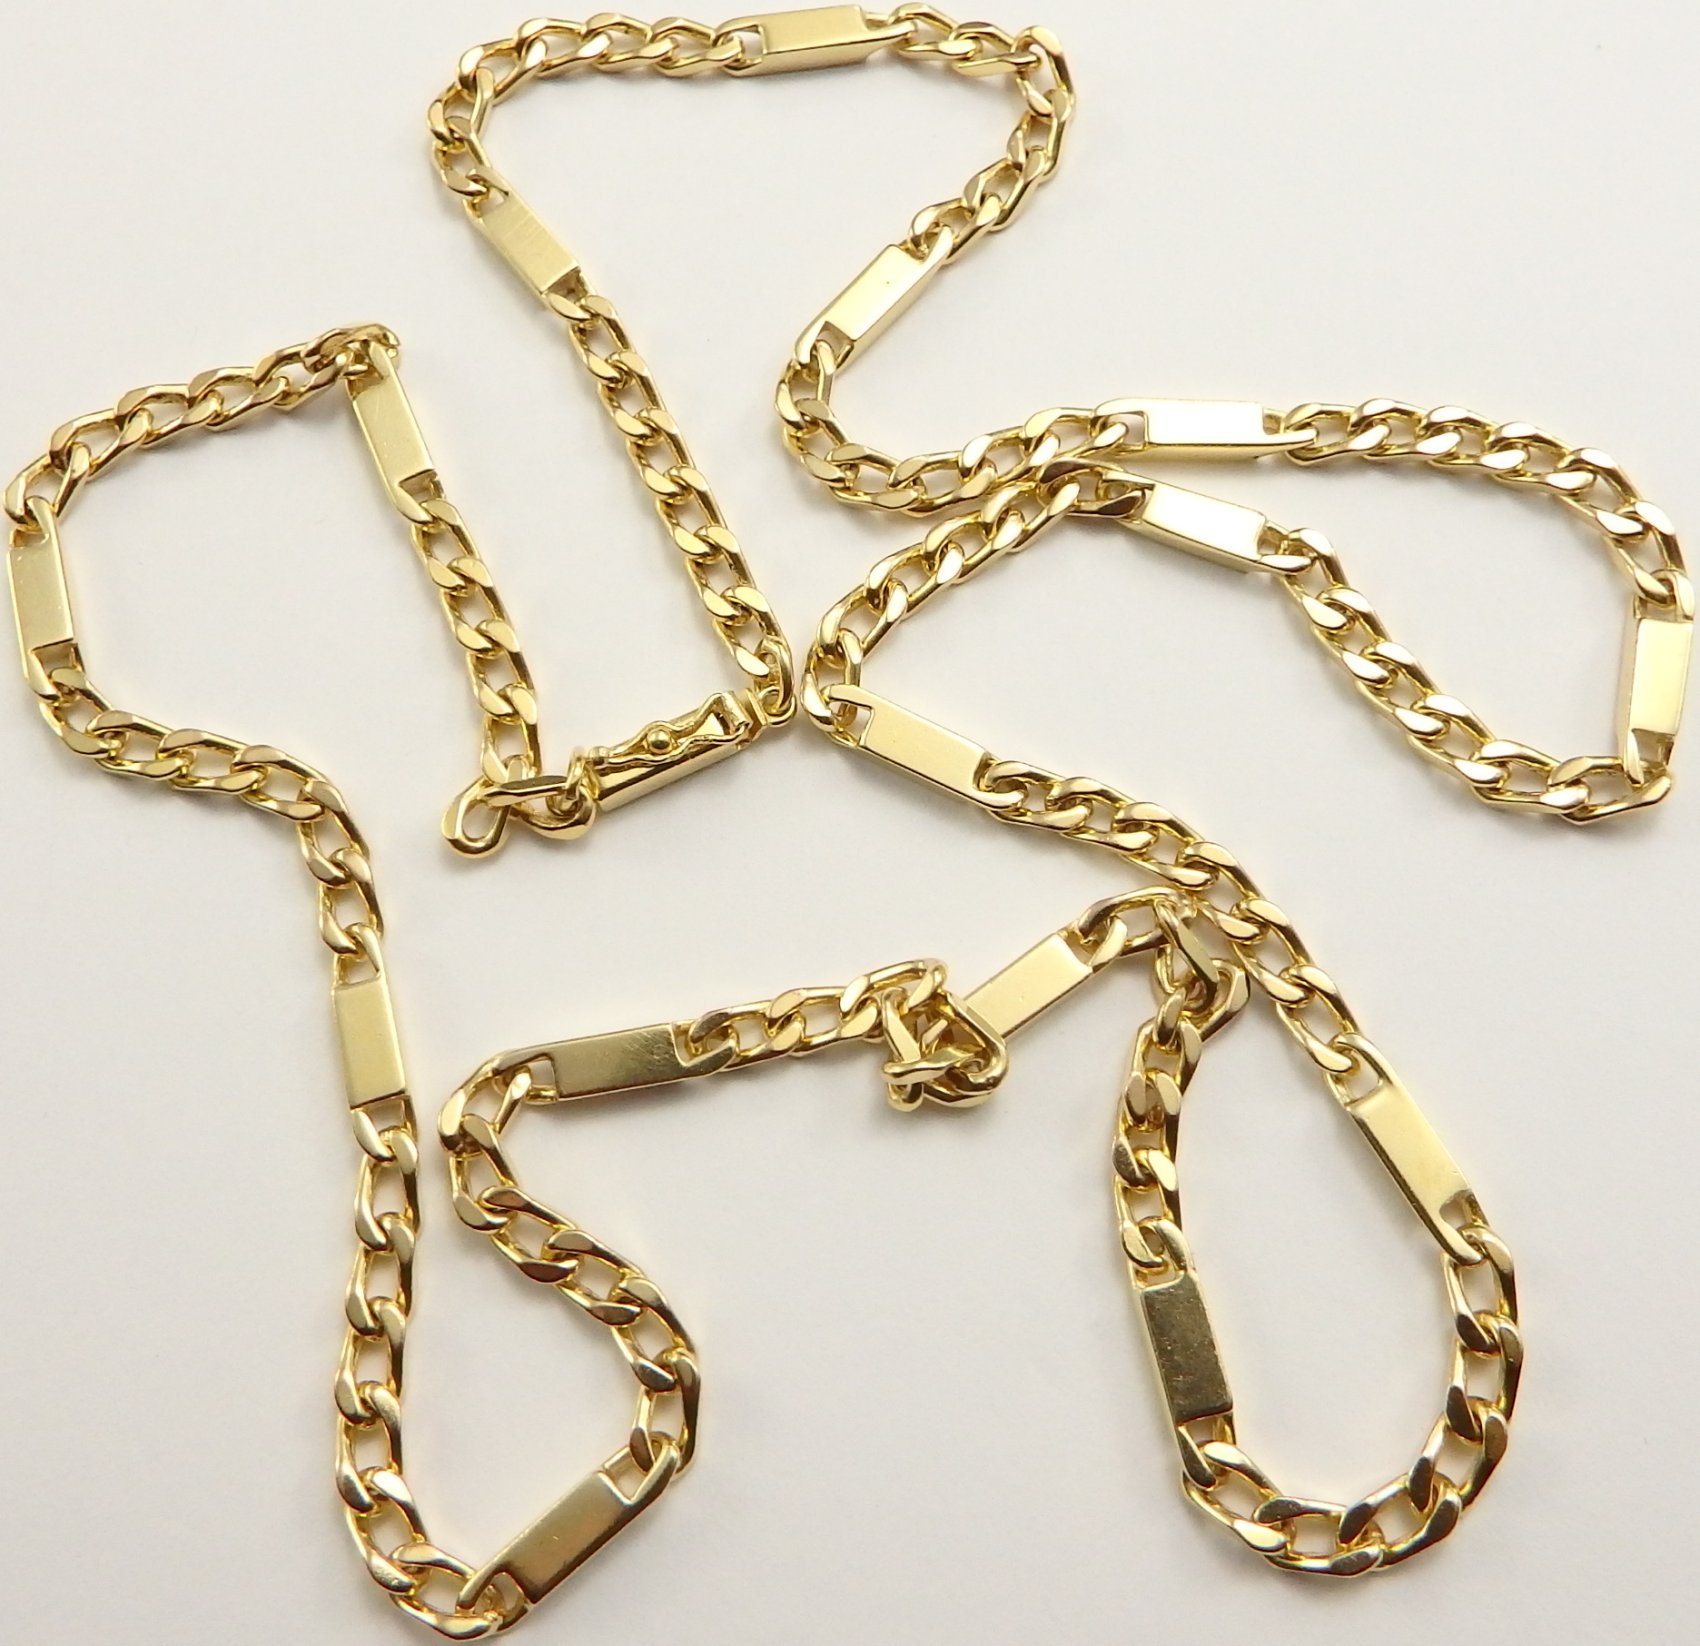 Heavy 9 carat solid gold 29 inch long yellow gold neck chain weighs 43. ...